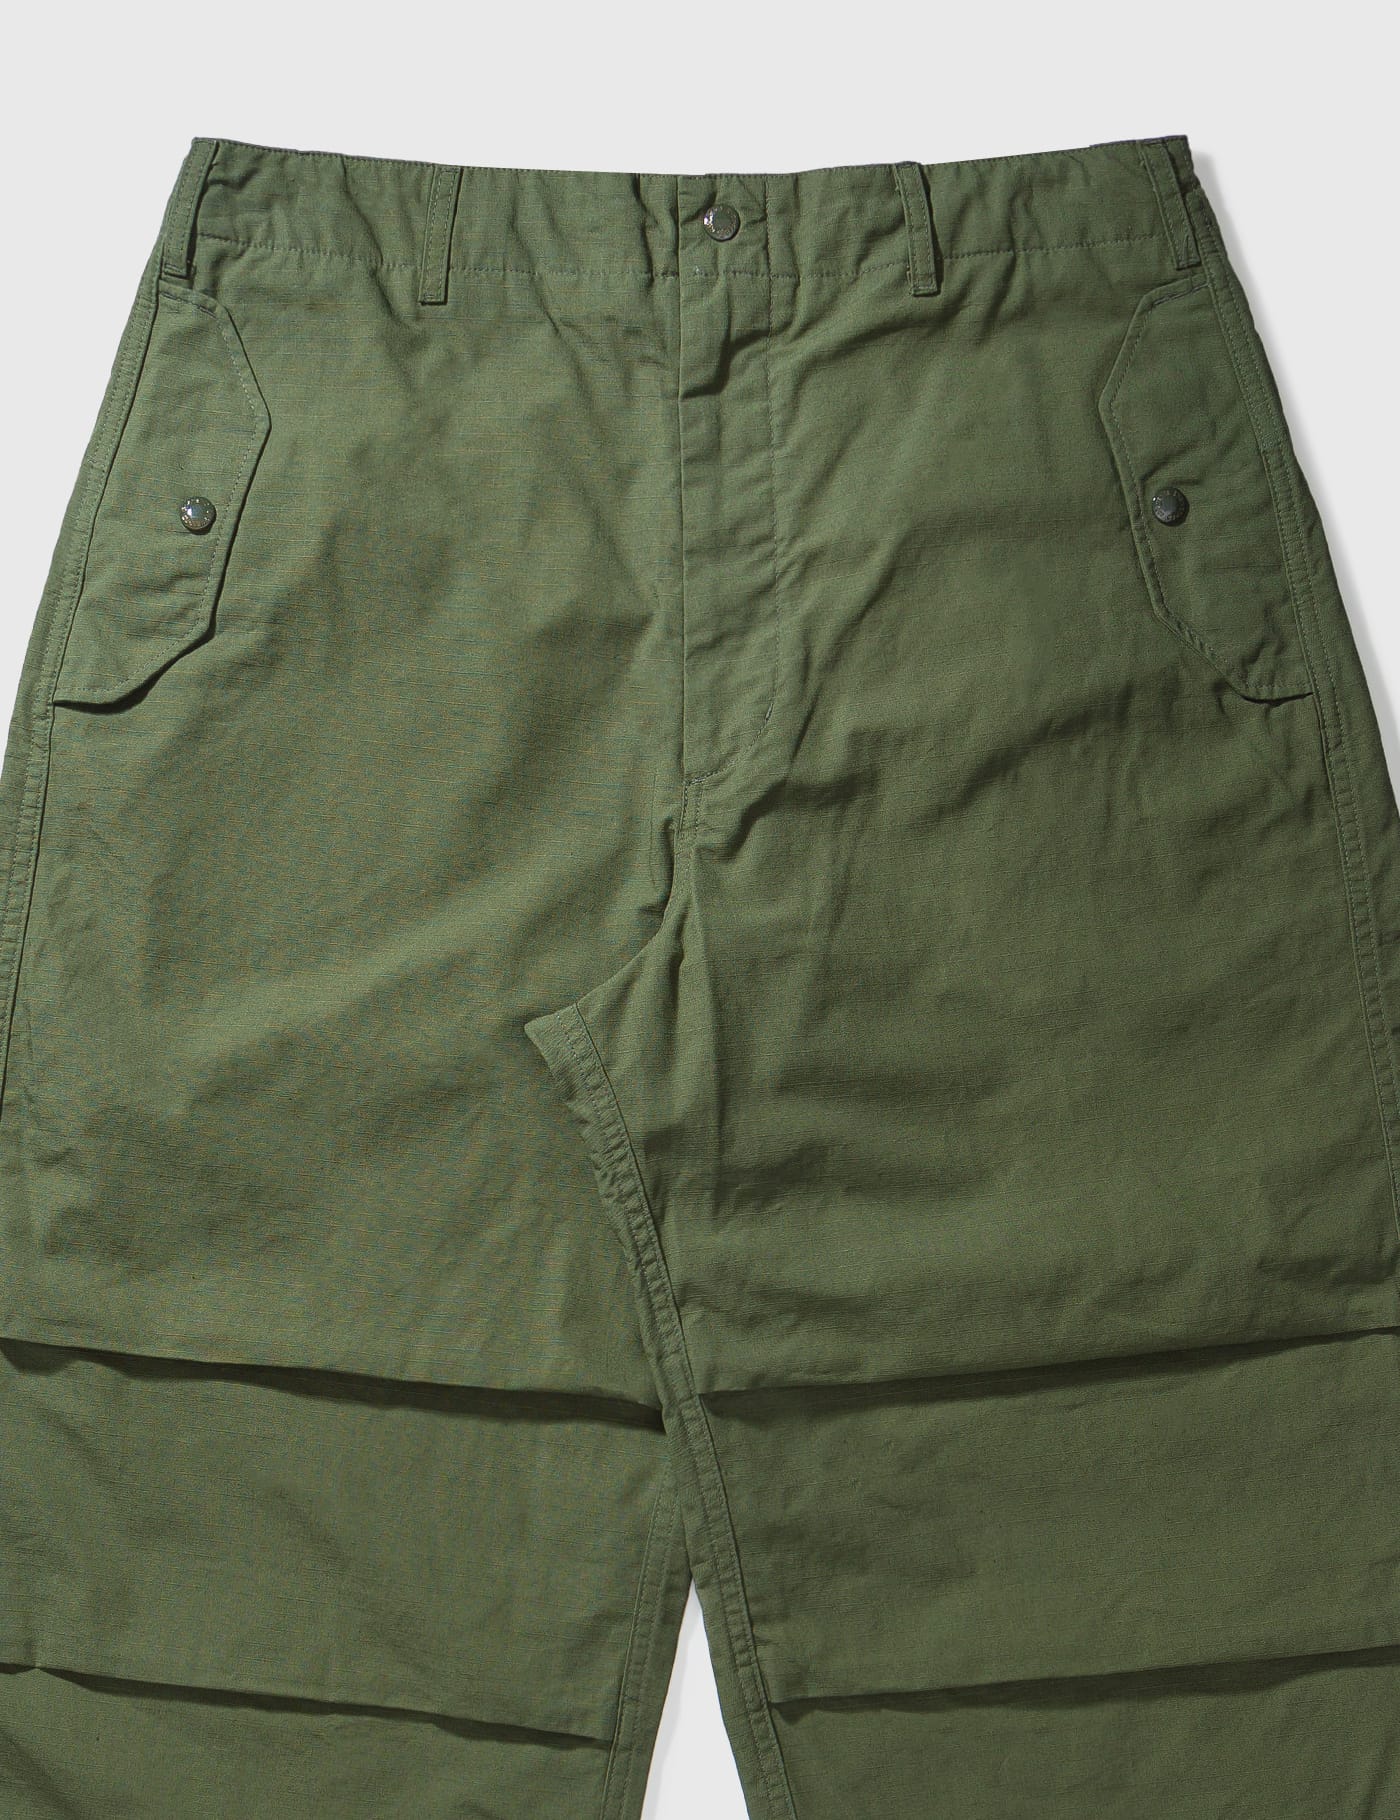 Engineered Garments - Over Pants | HBX - Globally Curated Fashion 